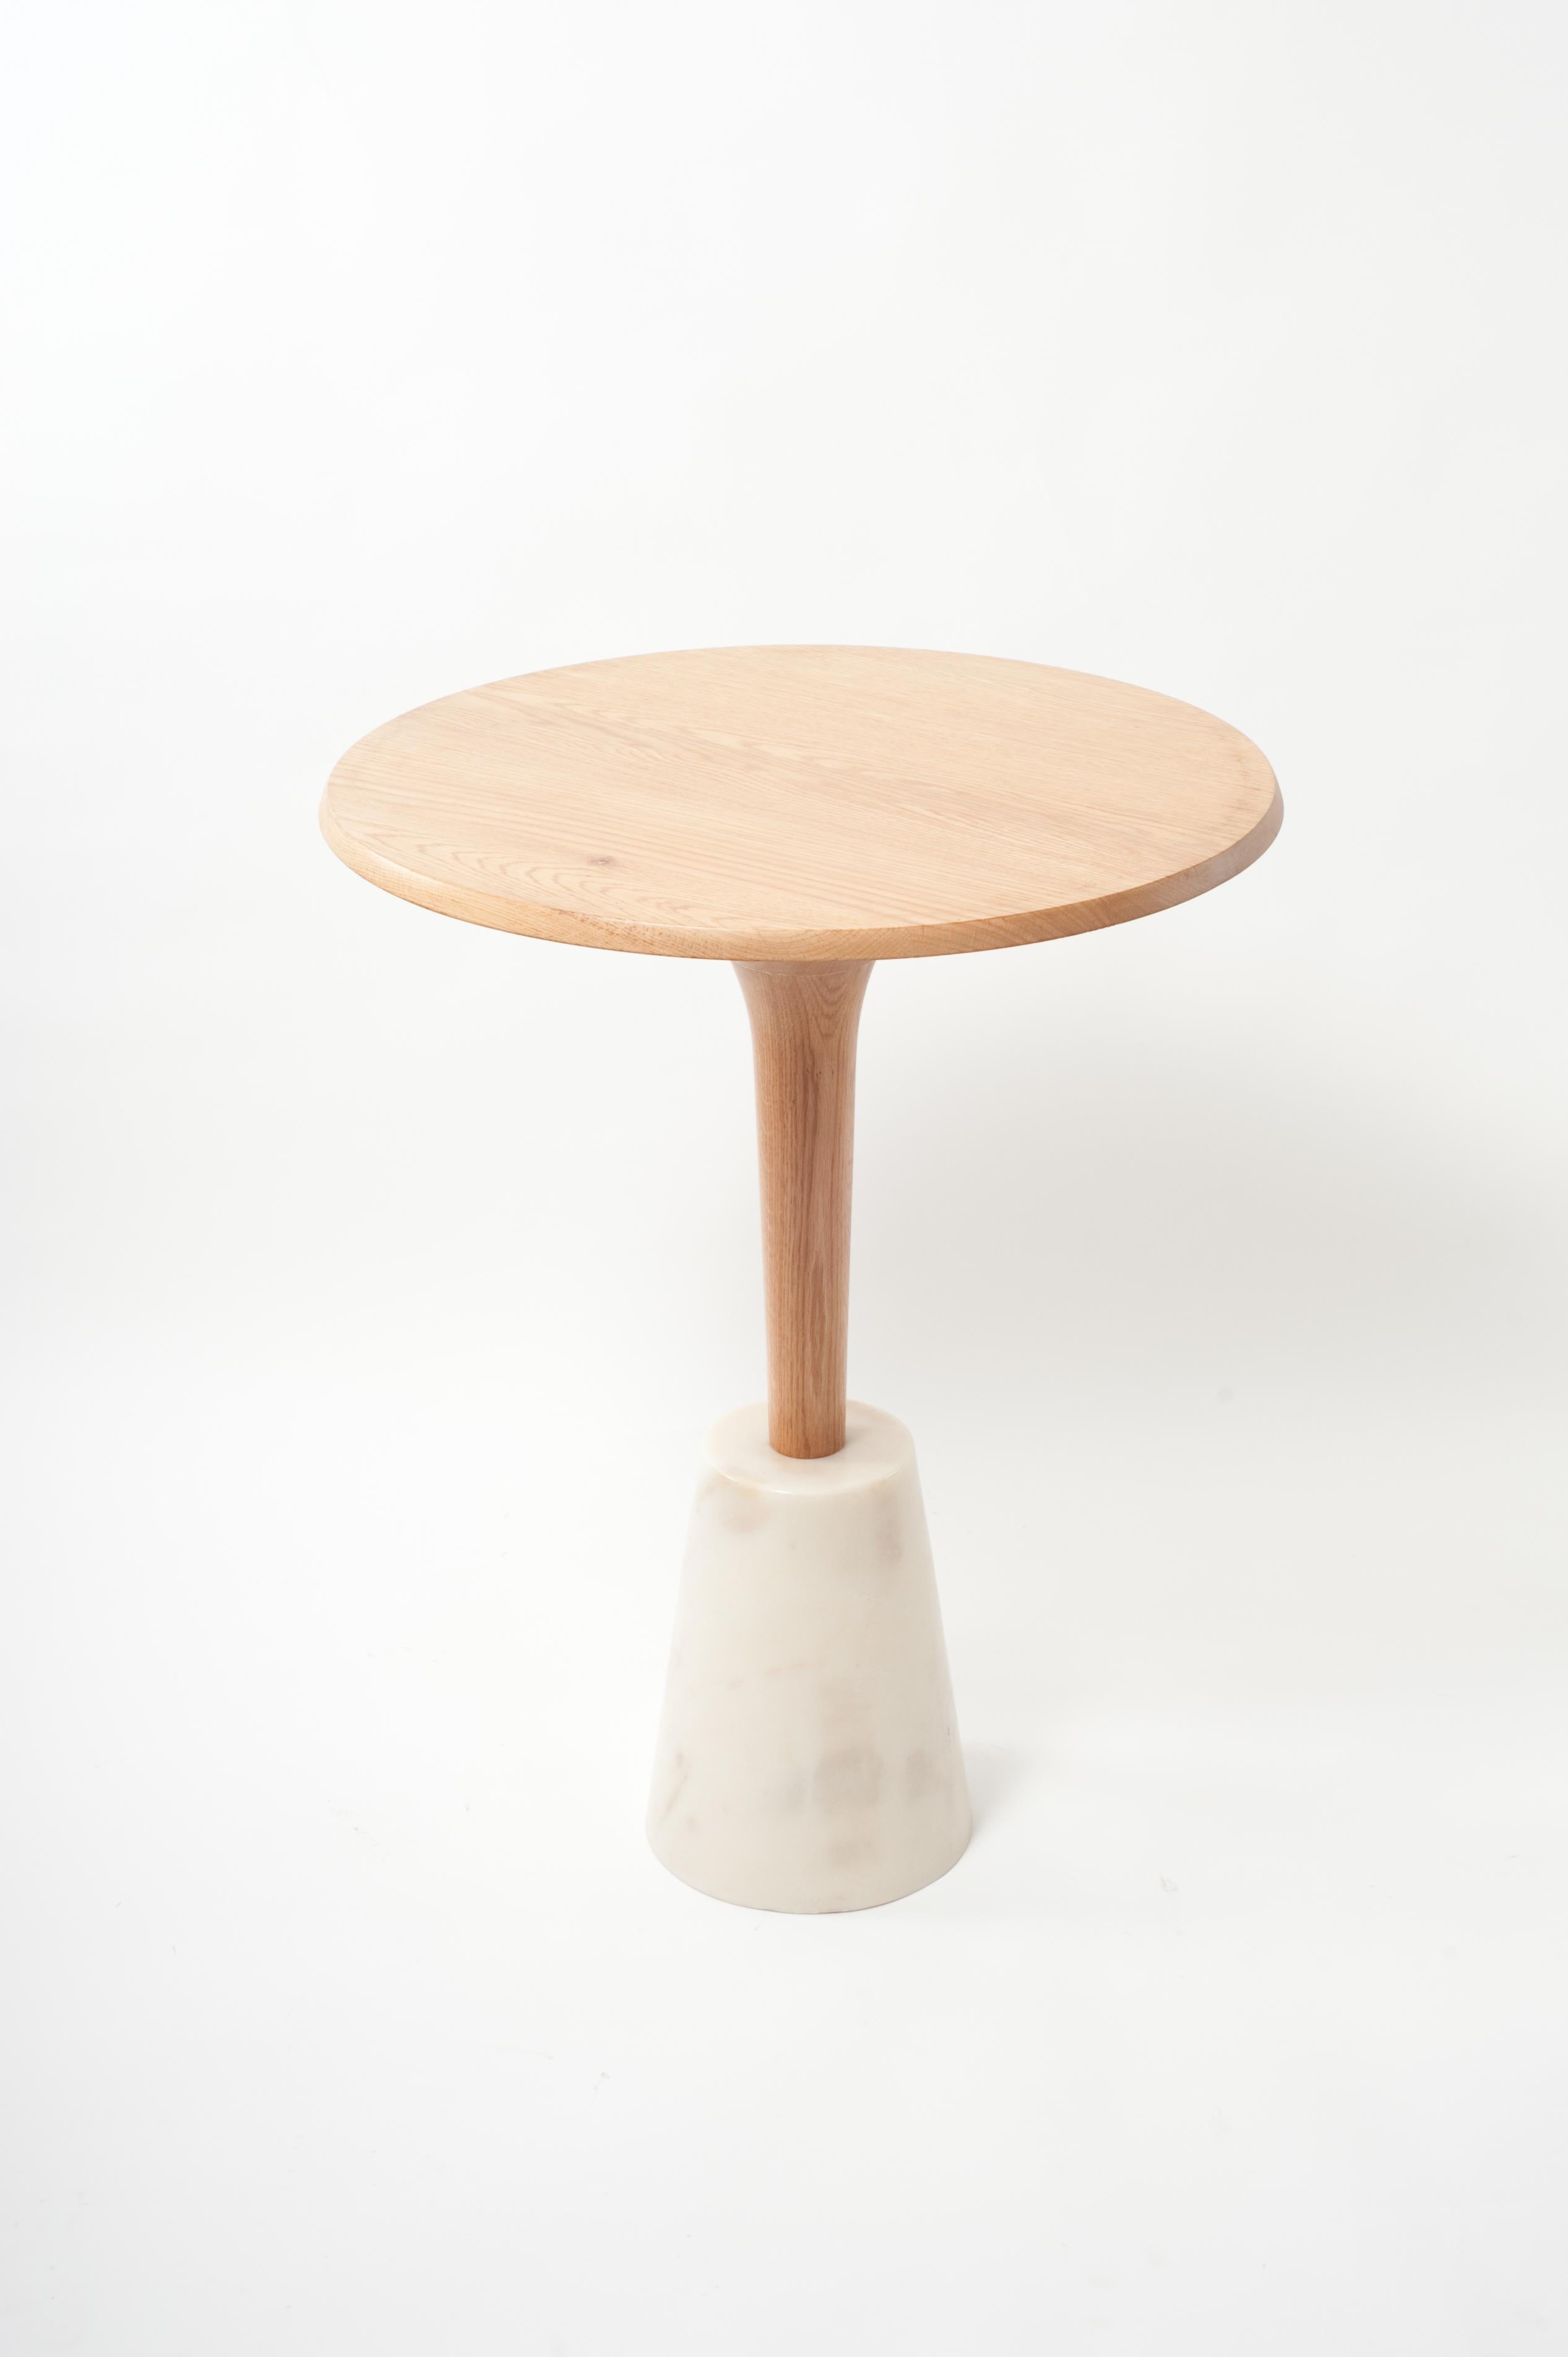 This Scandinavian-influenced occasional table is available in White Oak with a Purple White marble base. 

Founded in 2011, AKMD developed out of a thirteen-year friendship and design collaboration between Ayush Kasliwal and Mike Dreeben.

The two